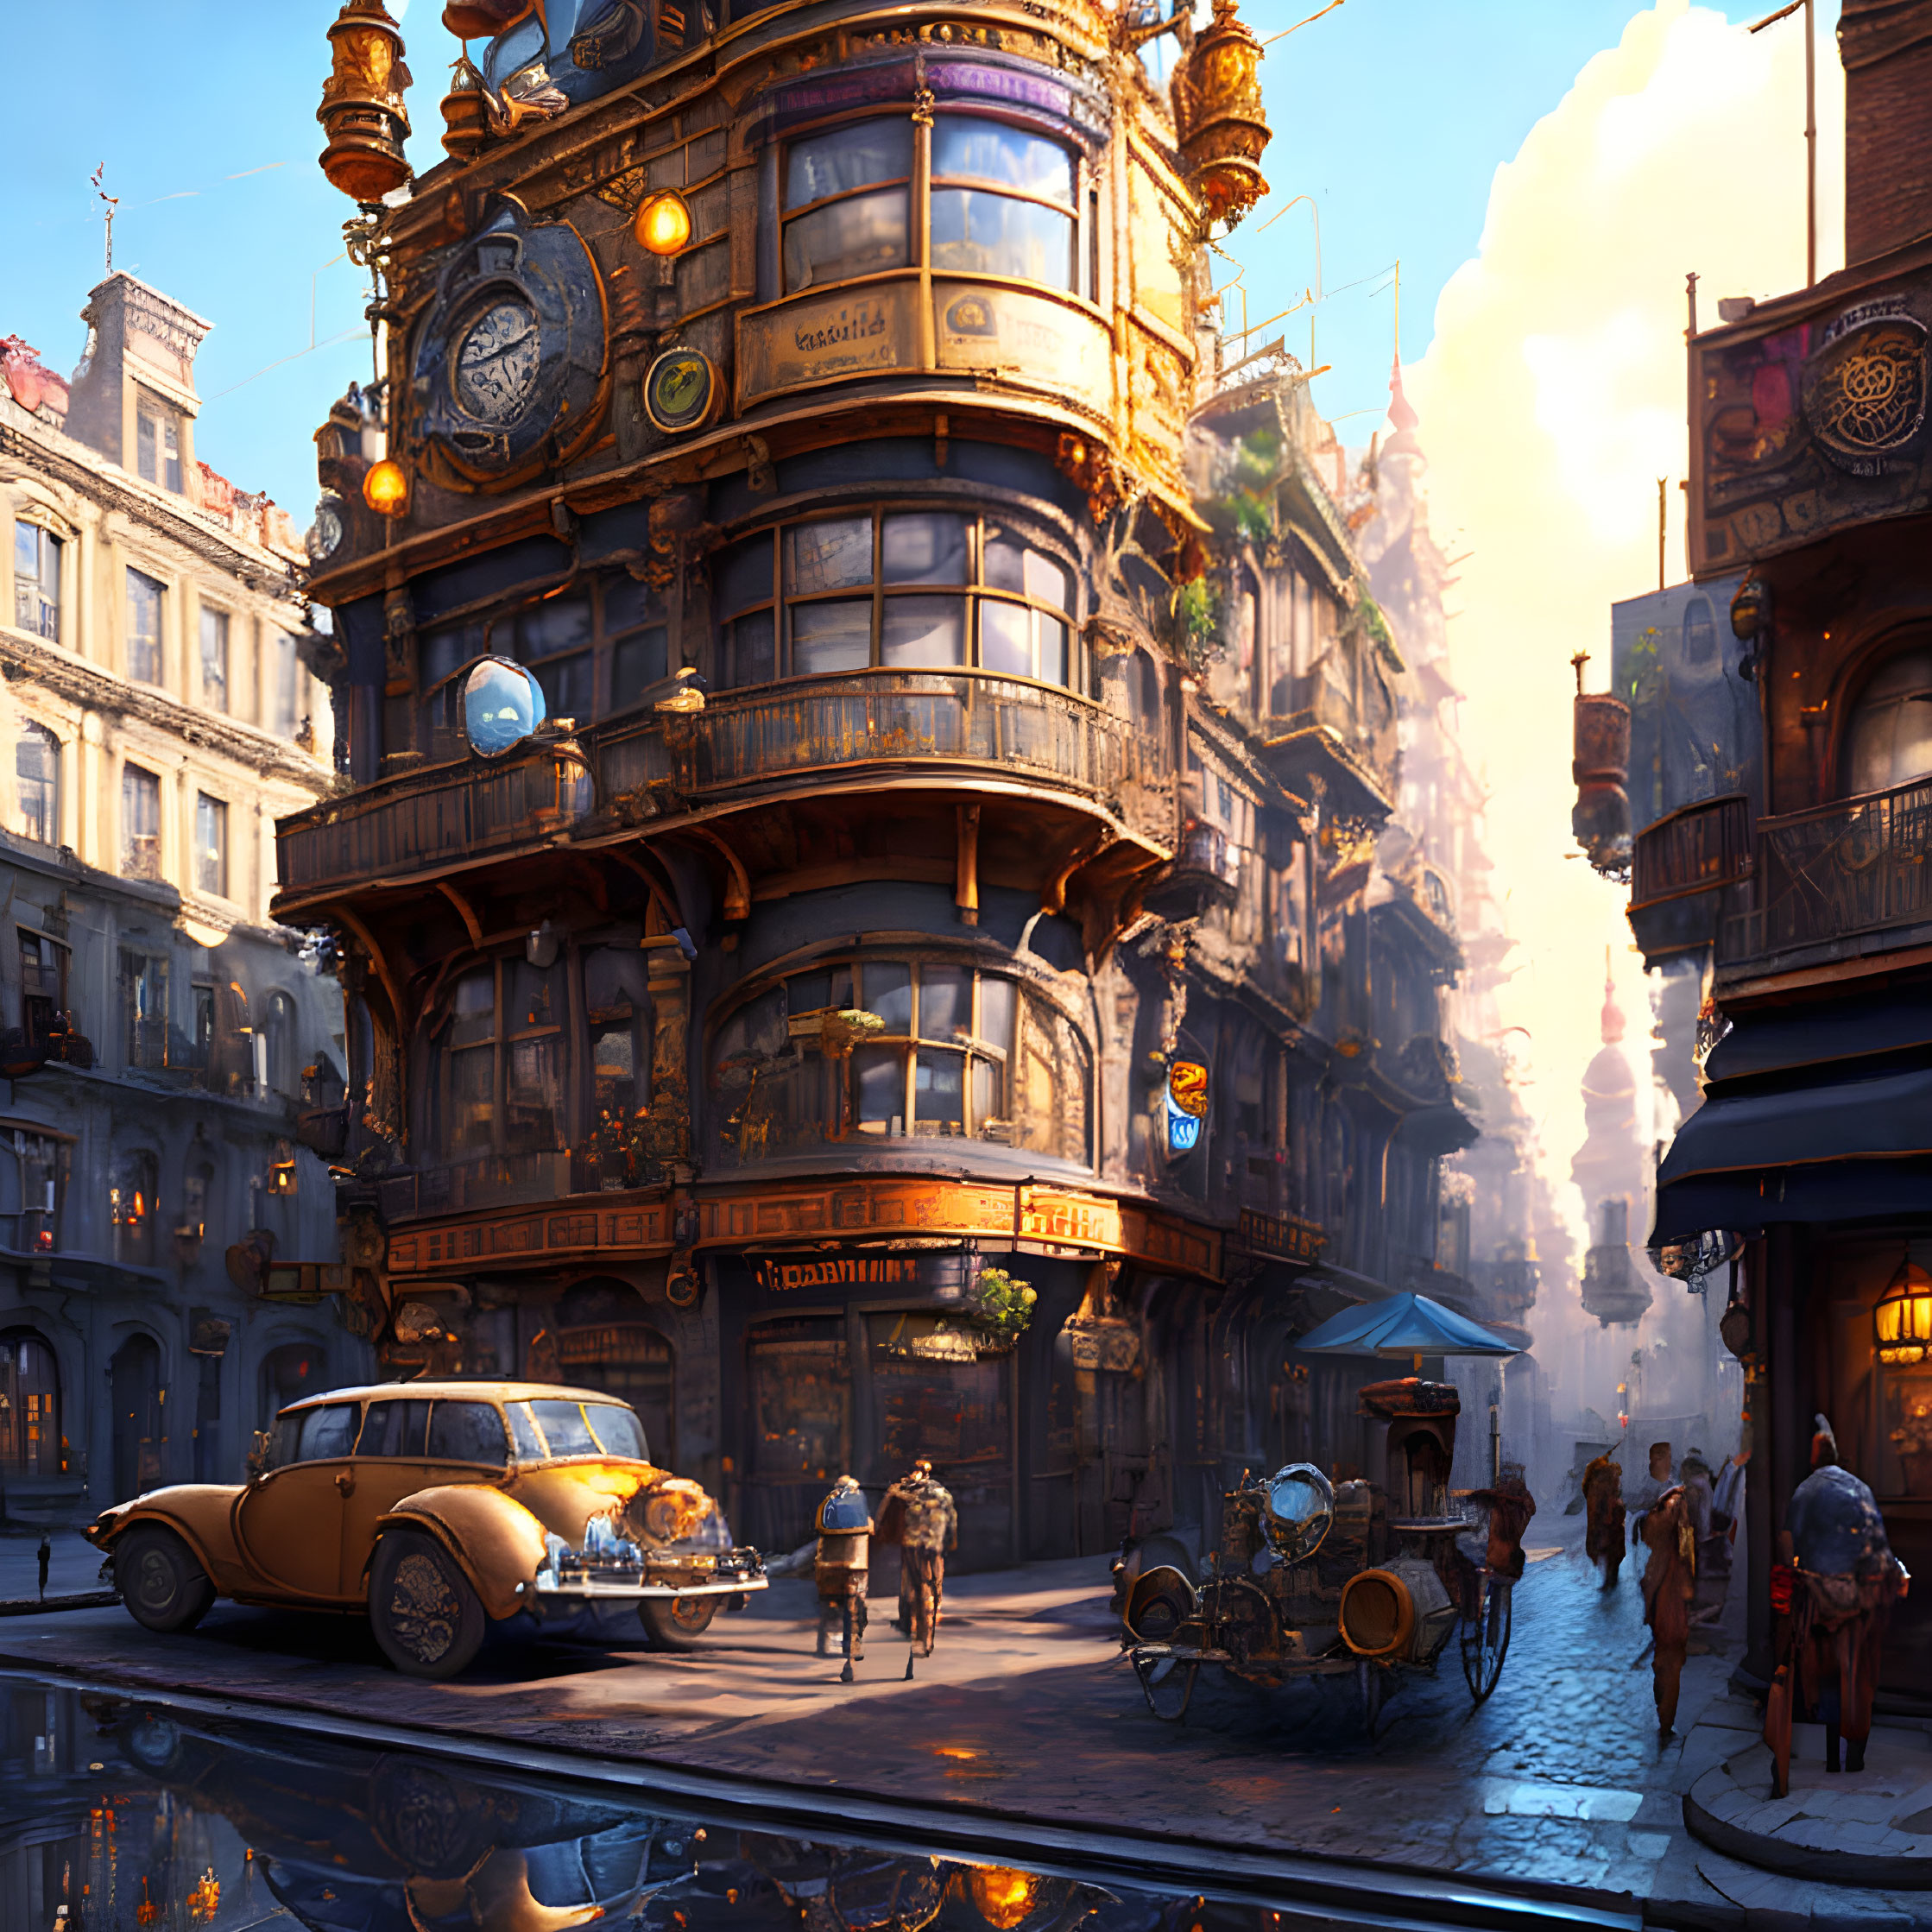 Steampunk-style architecture with ornate details, classic car, and bustling city life on cobble